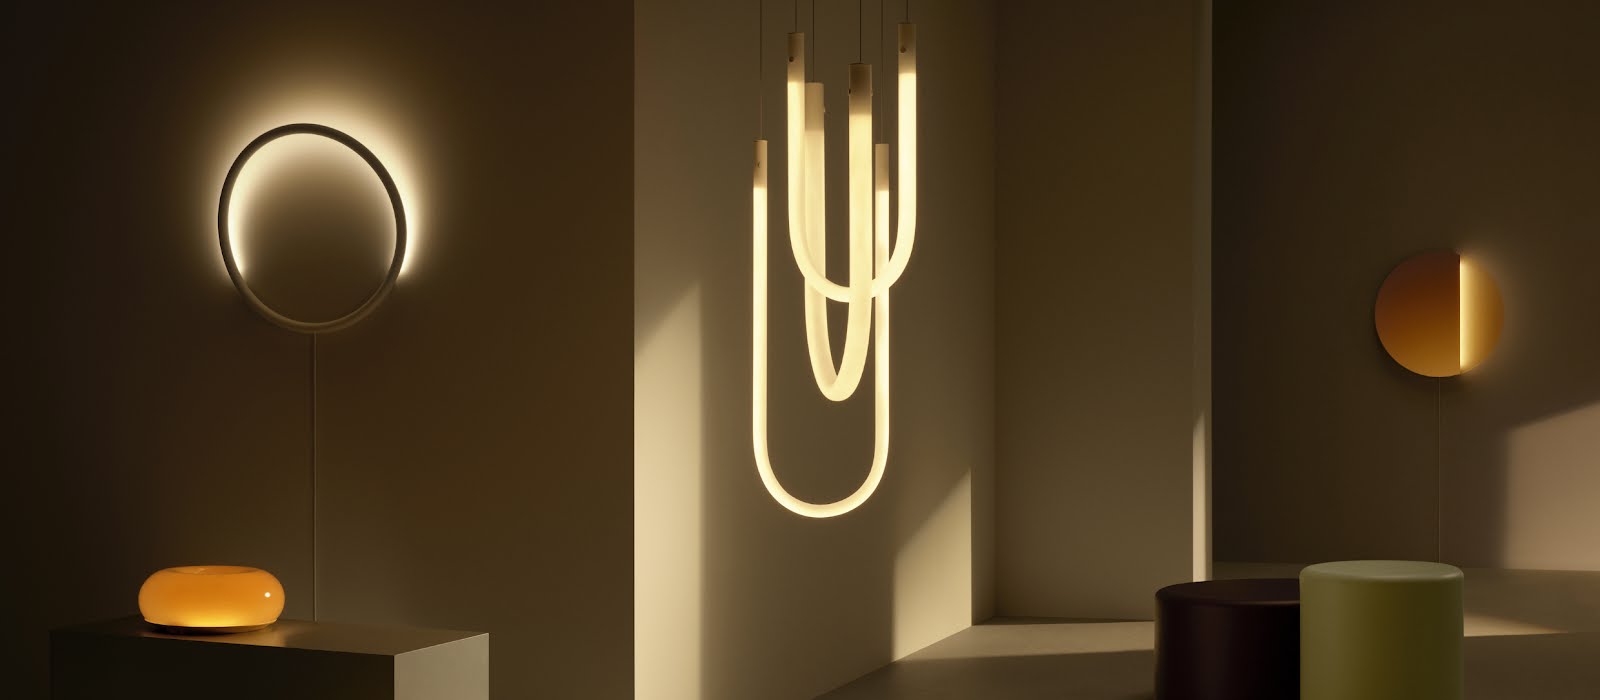 Ikea has collaborated with designer Sabine Marcelis on a collection focused on light